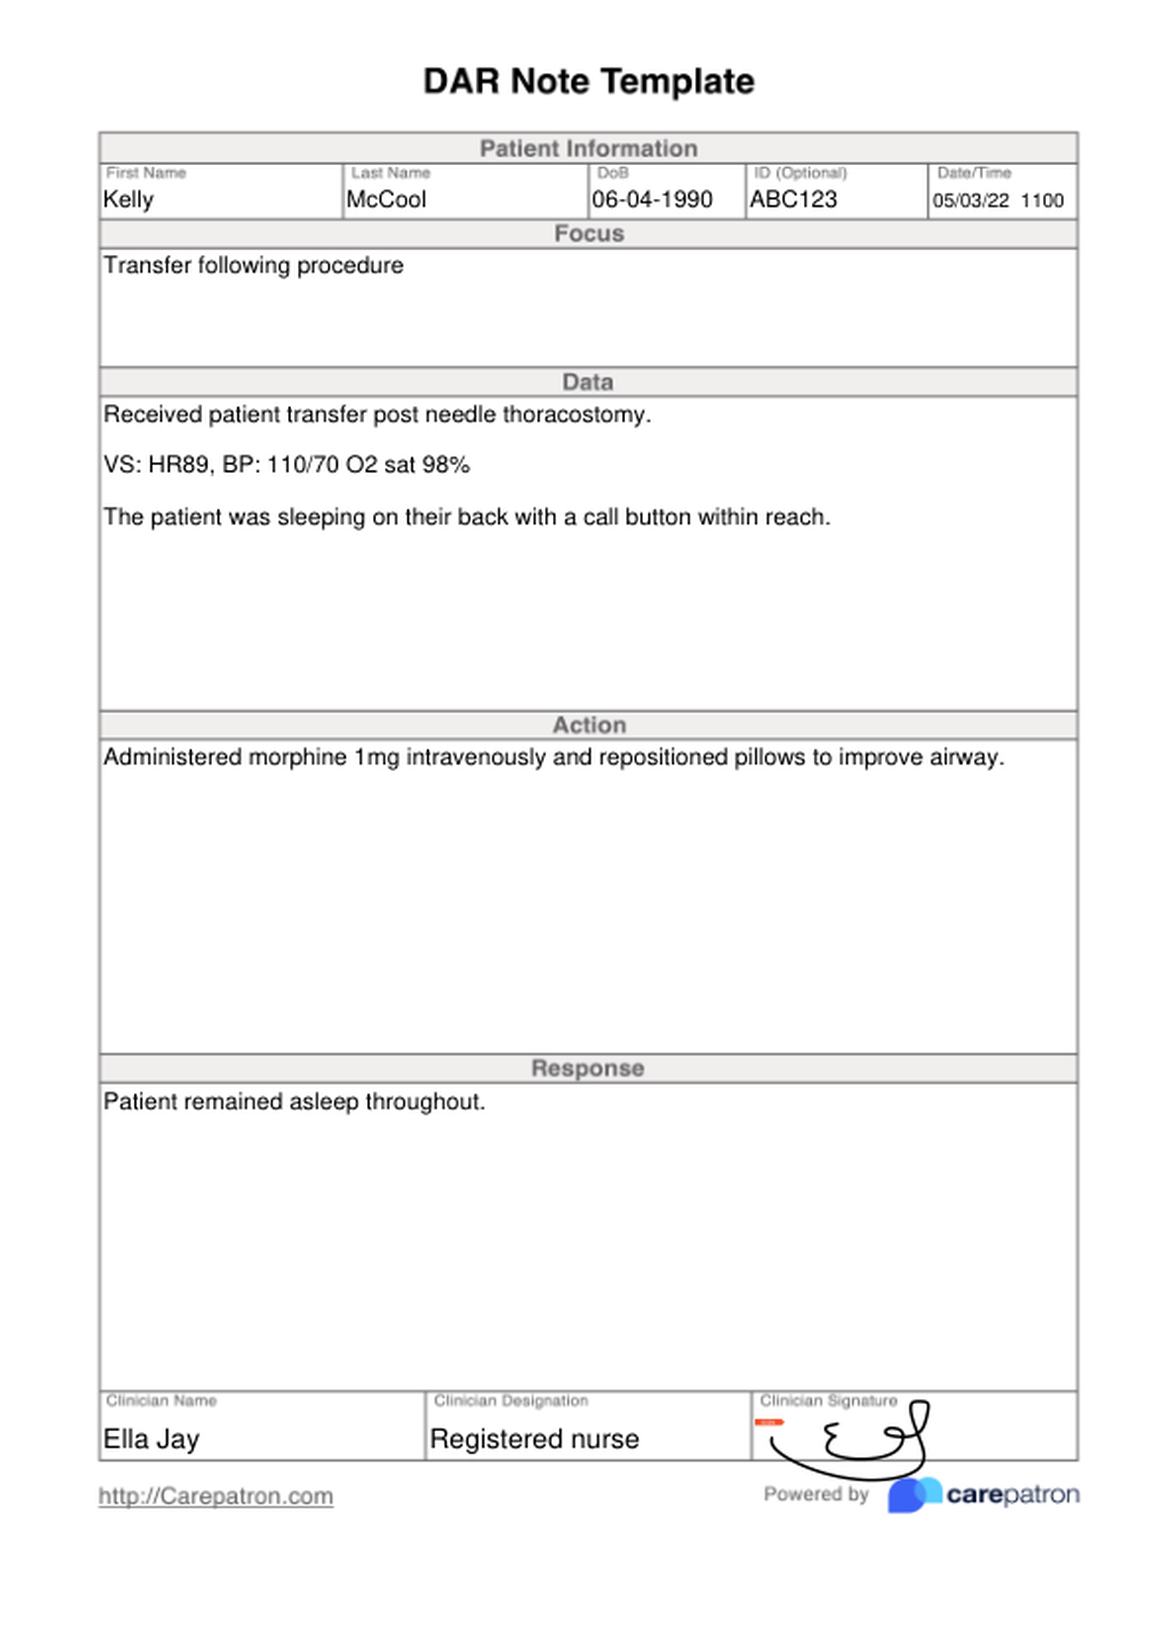 DAR Note Template PDF Example